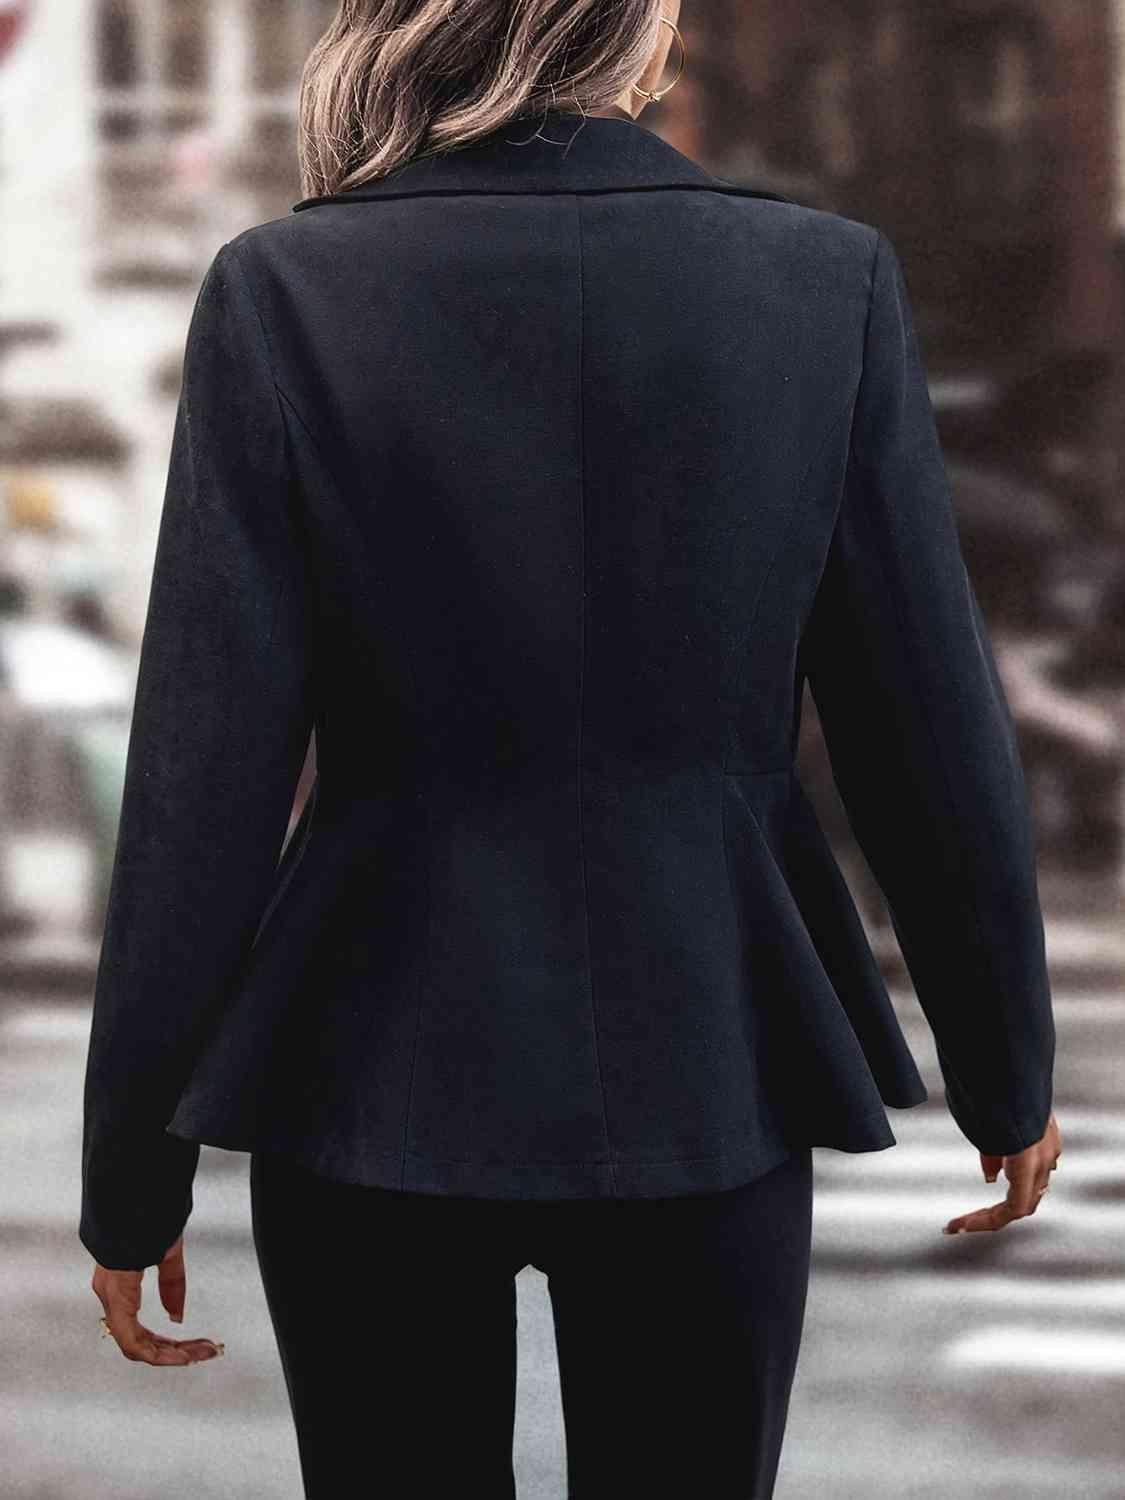 a woman in a black suit is walking down the street